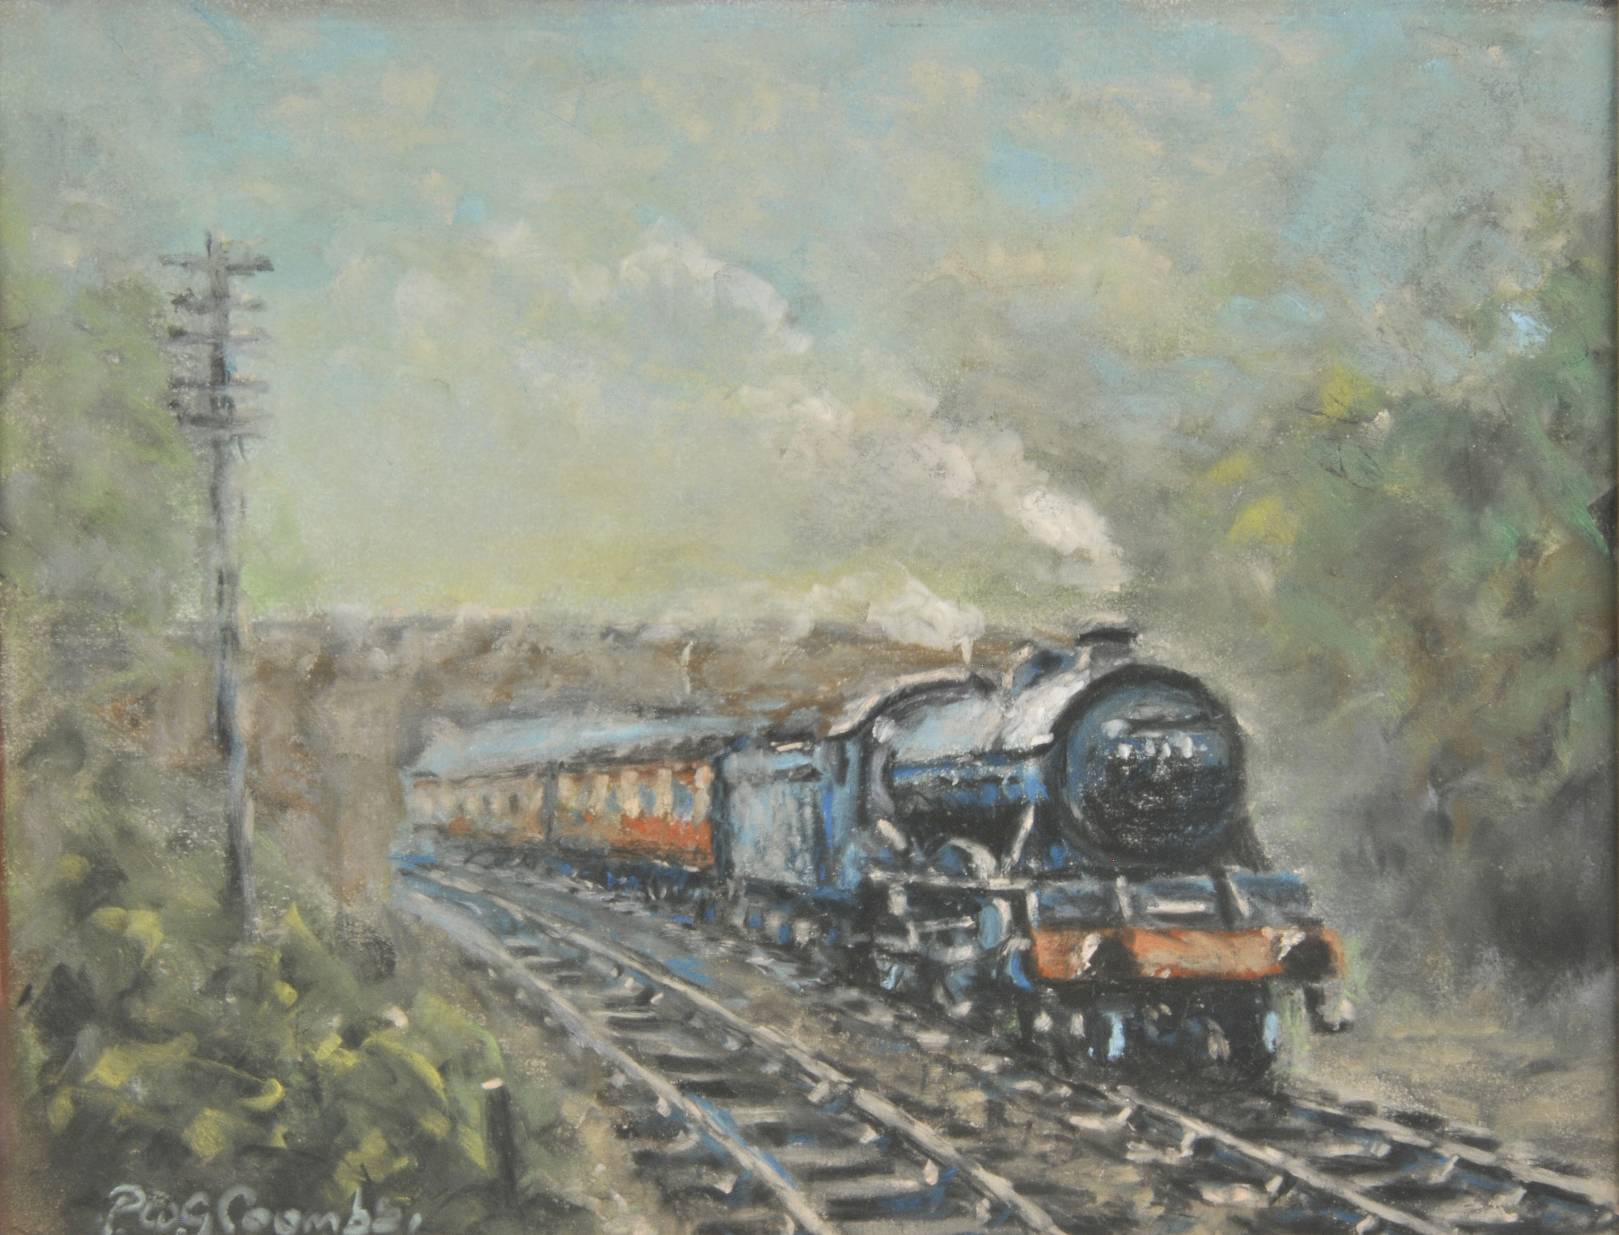 *Coombs (Peter, 1929-2007). Full Steam Ahead, pastel on paper, showing a locomotive coming through a